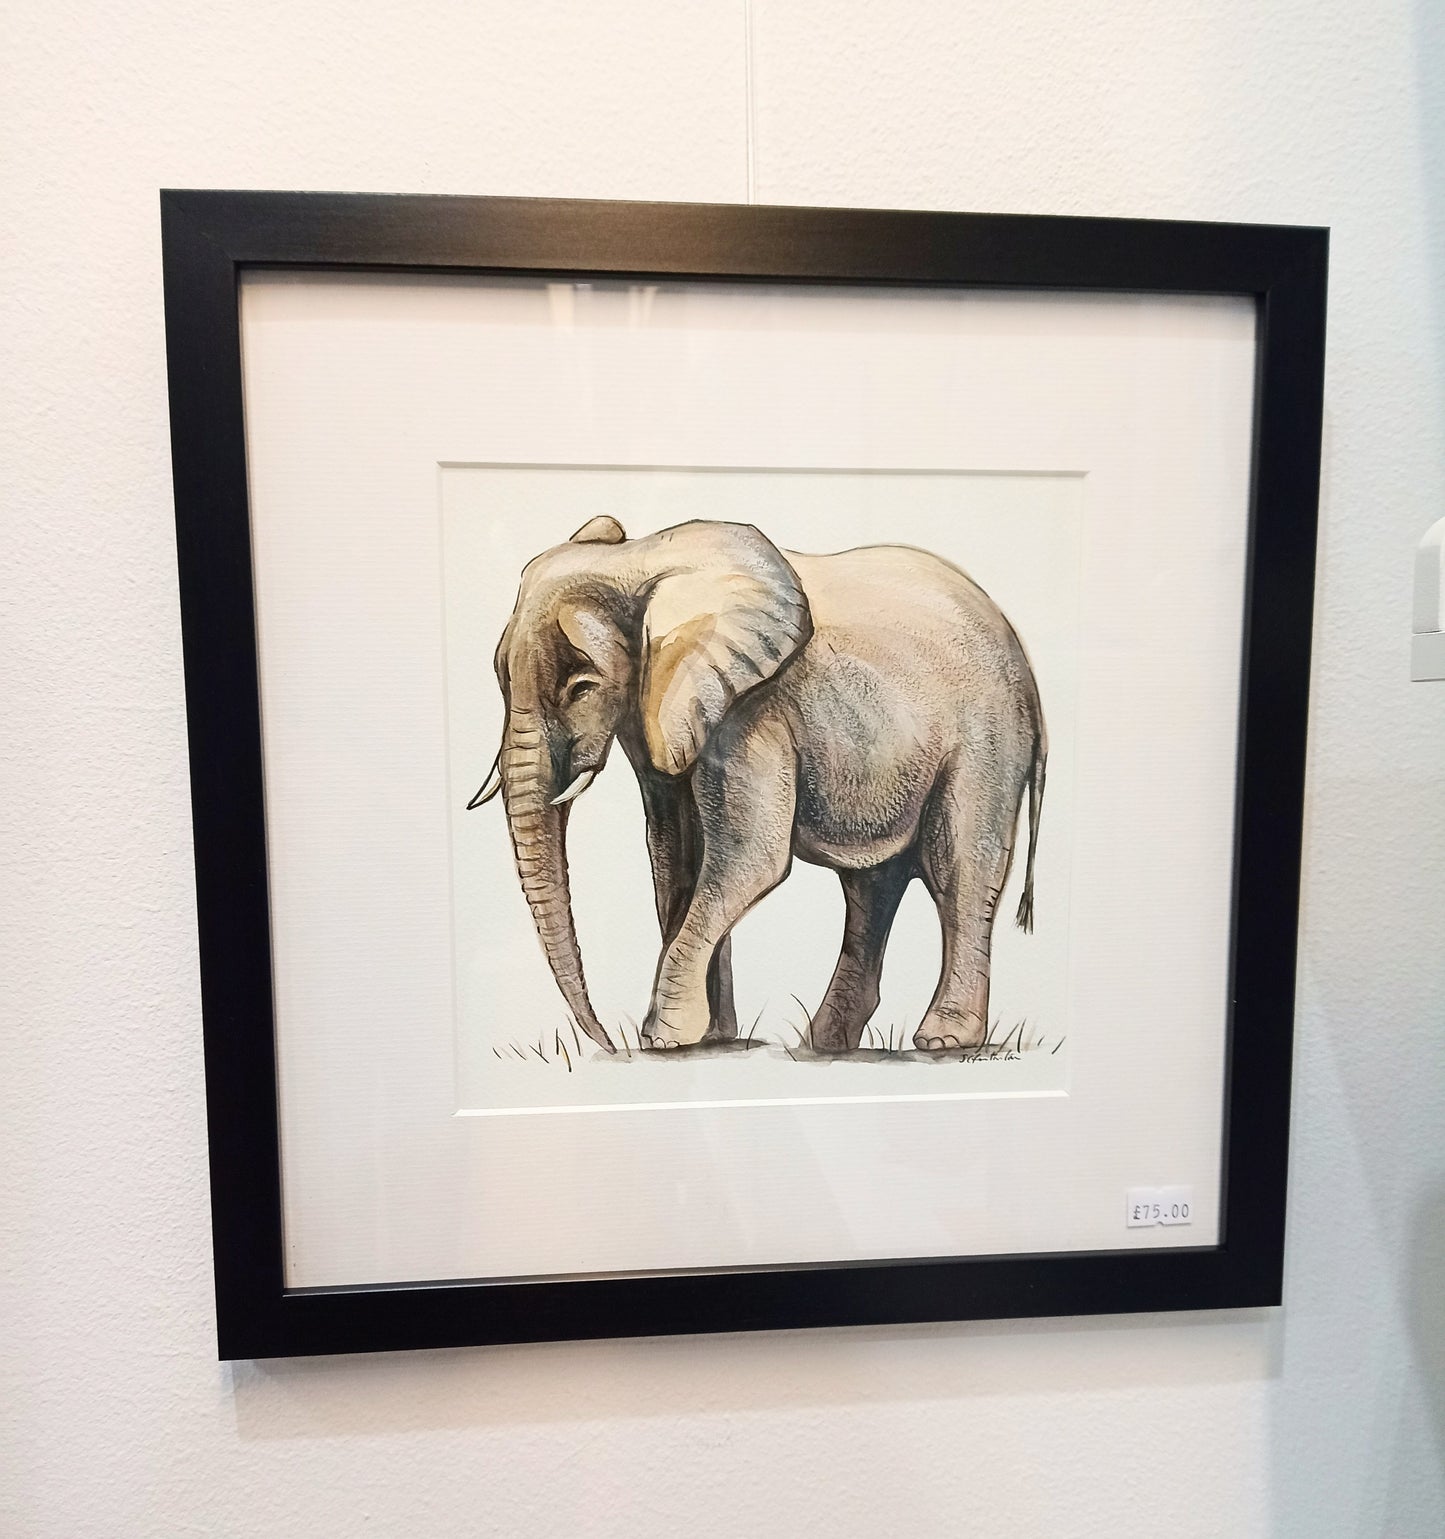 Elephant Watercolour Painting Framed